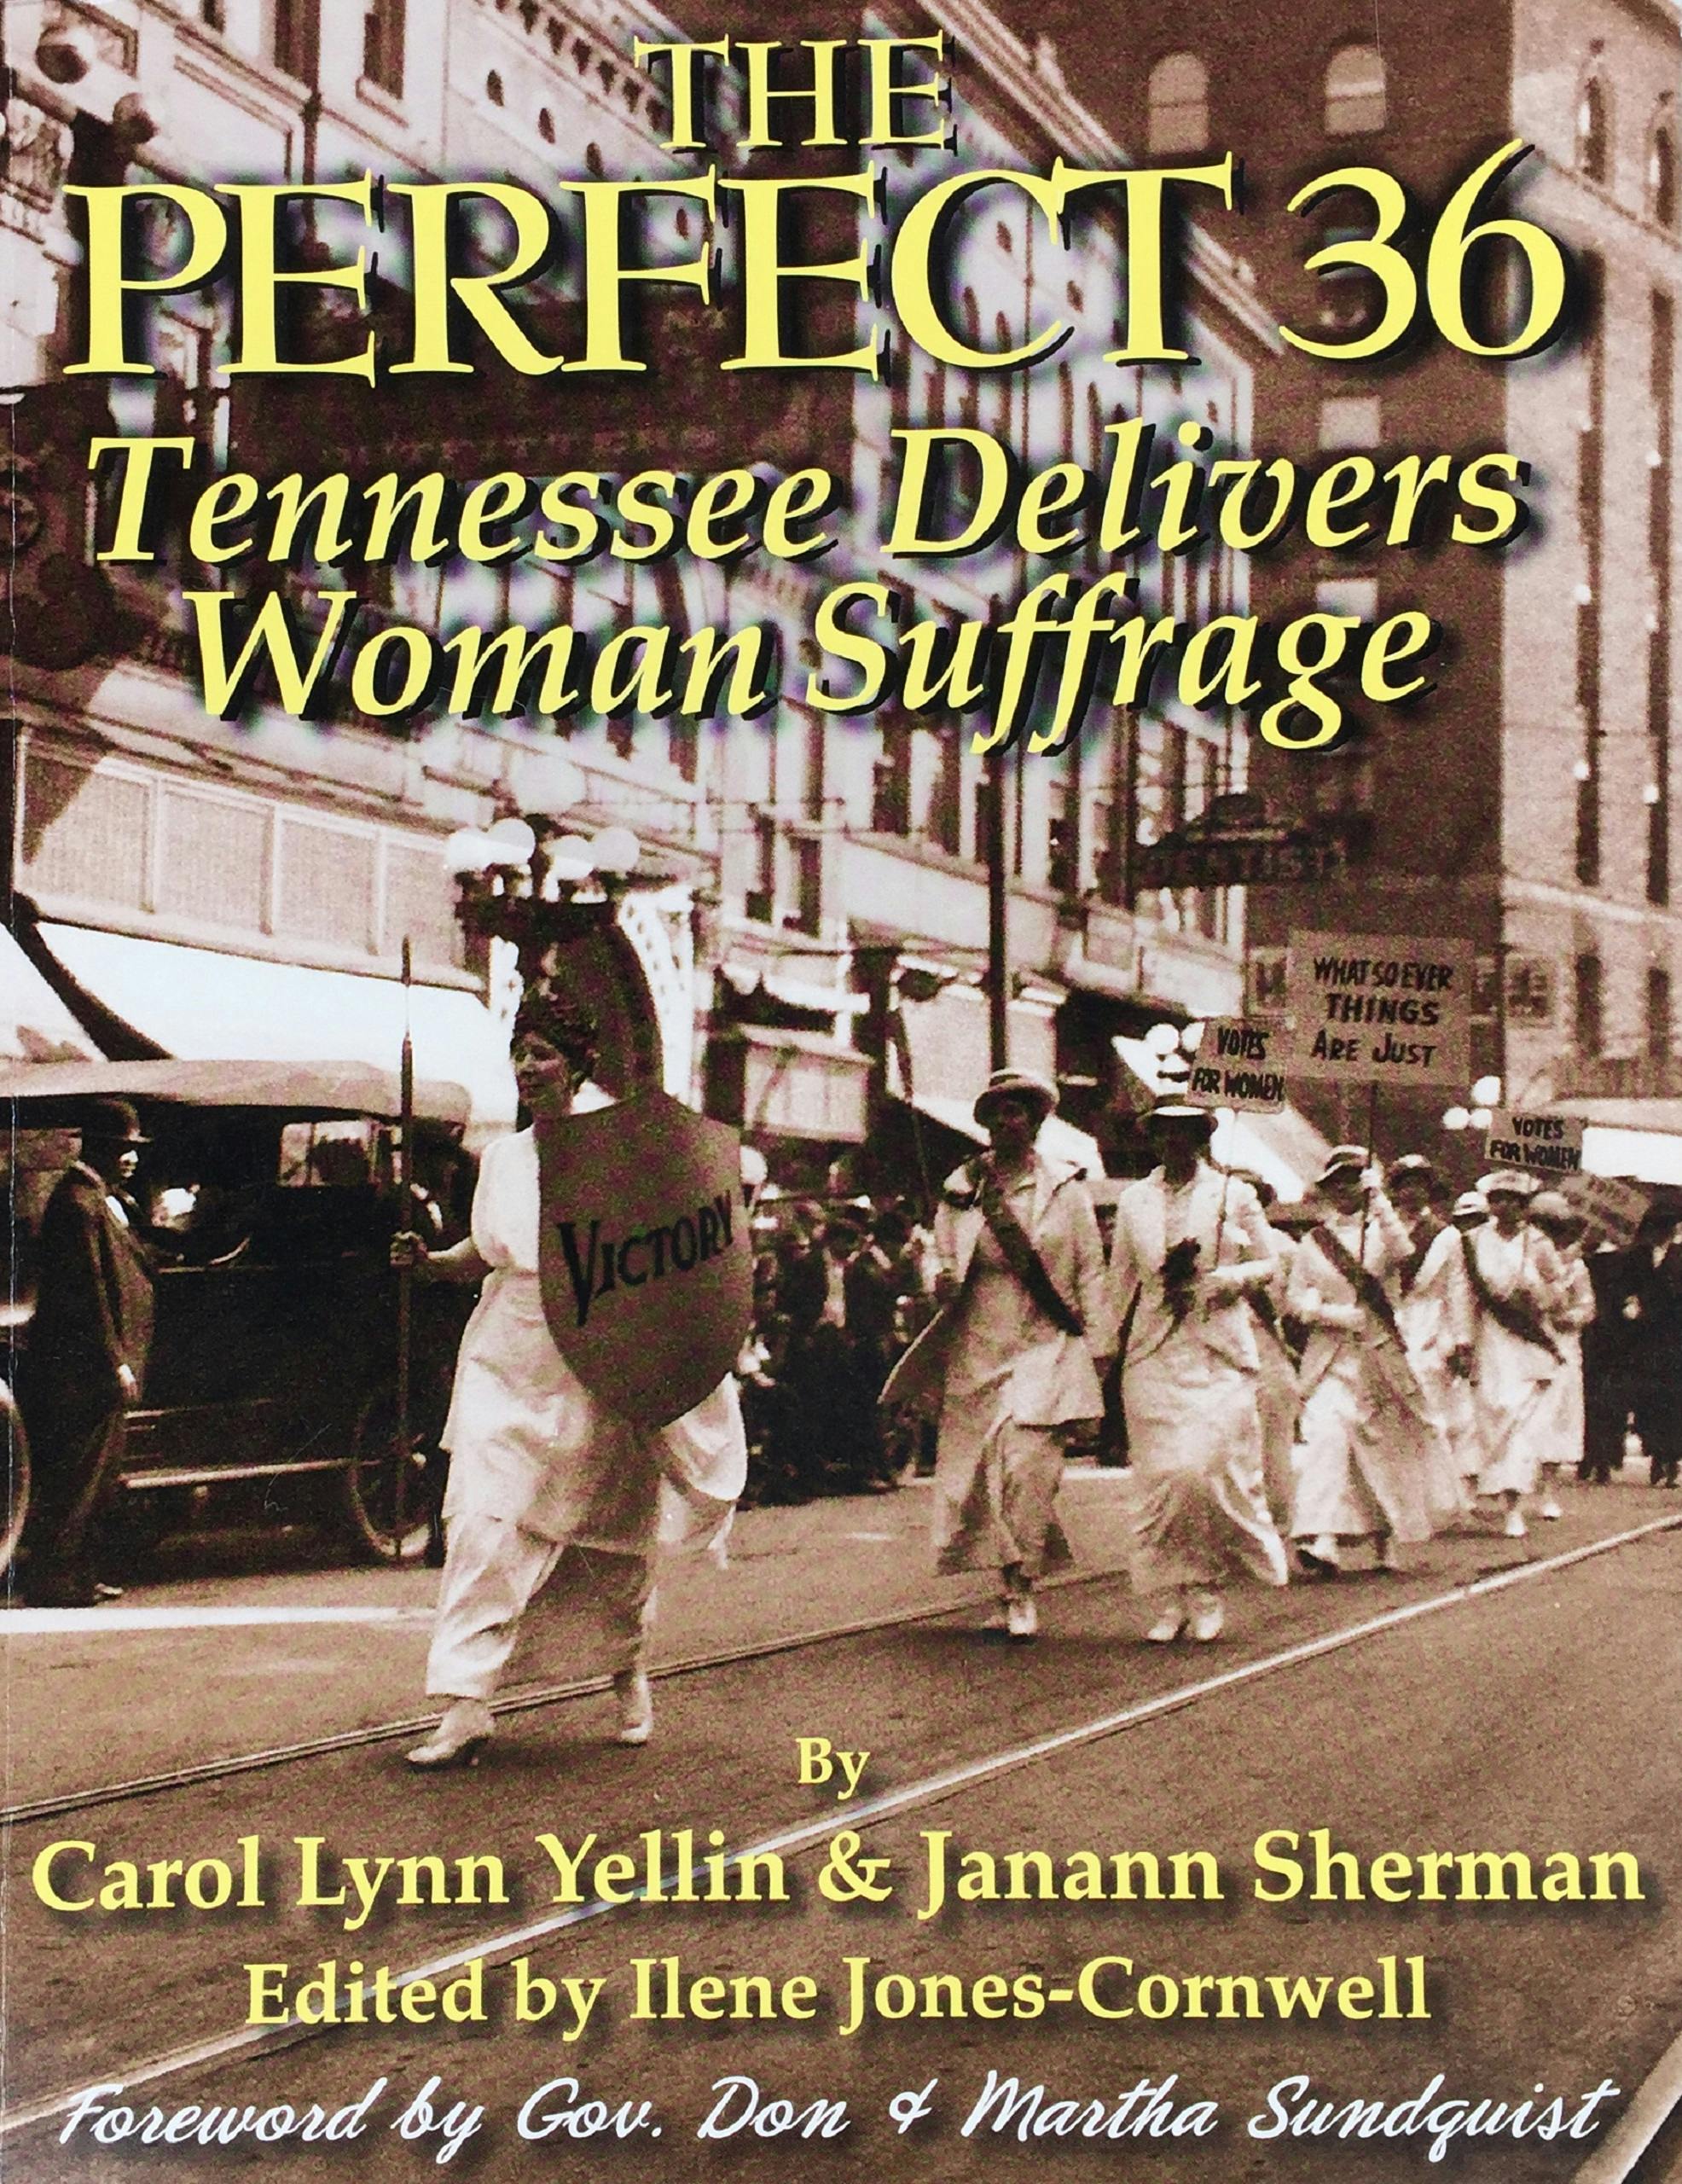 The Perfect 36: Tennessee Delivers Woman Suffrage - Carol Lynn Yellin, Janann Sherman